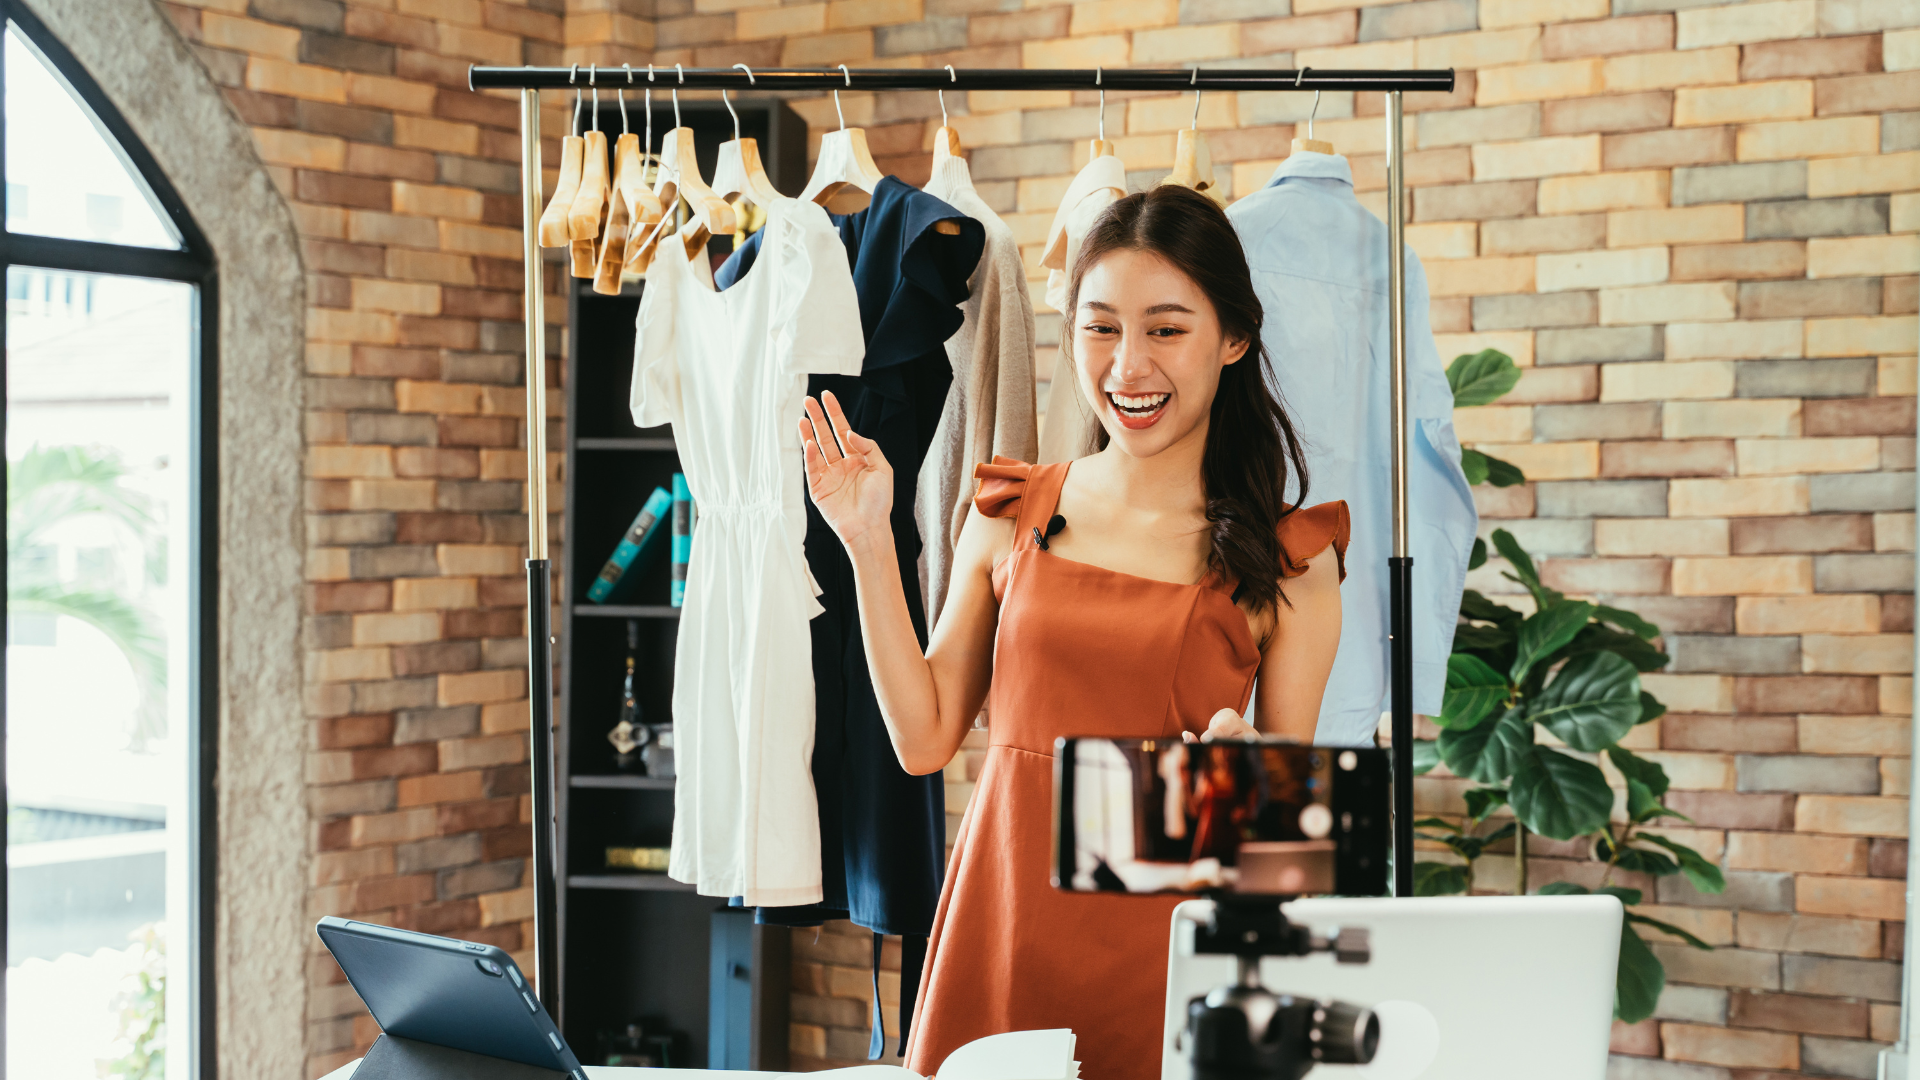 Image of an influencer speaking in front of a camera, showcasing Rawlings Media's expertise in influencer marketing. The background includes a clothing rack, symbolizing the company's collaboration with fashion brands and their ability to create engaging content for fashion influencers.